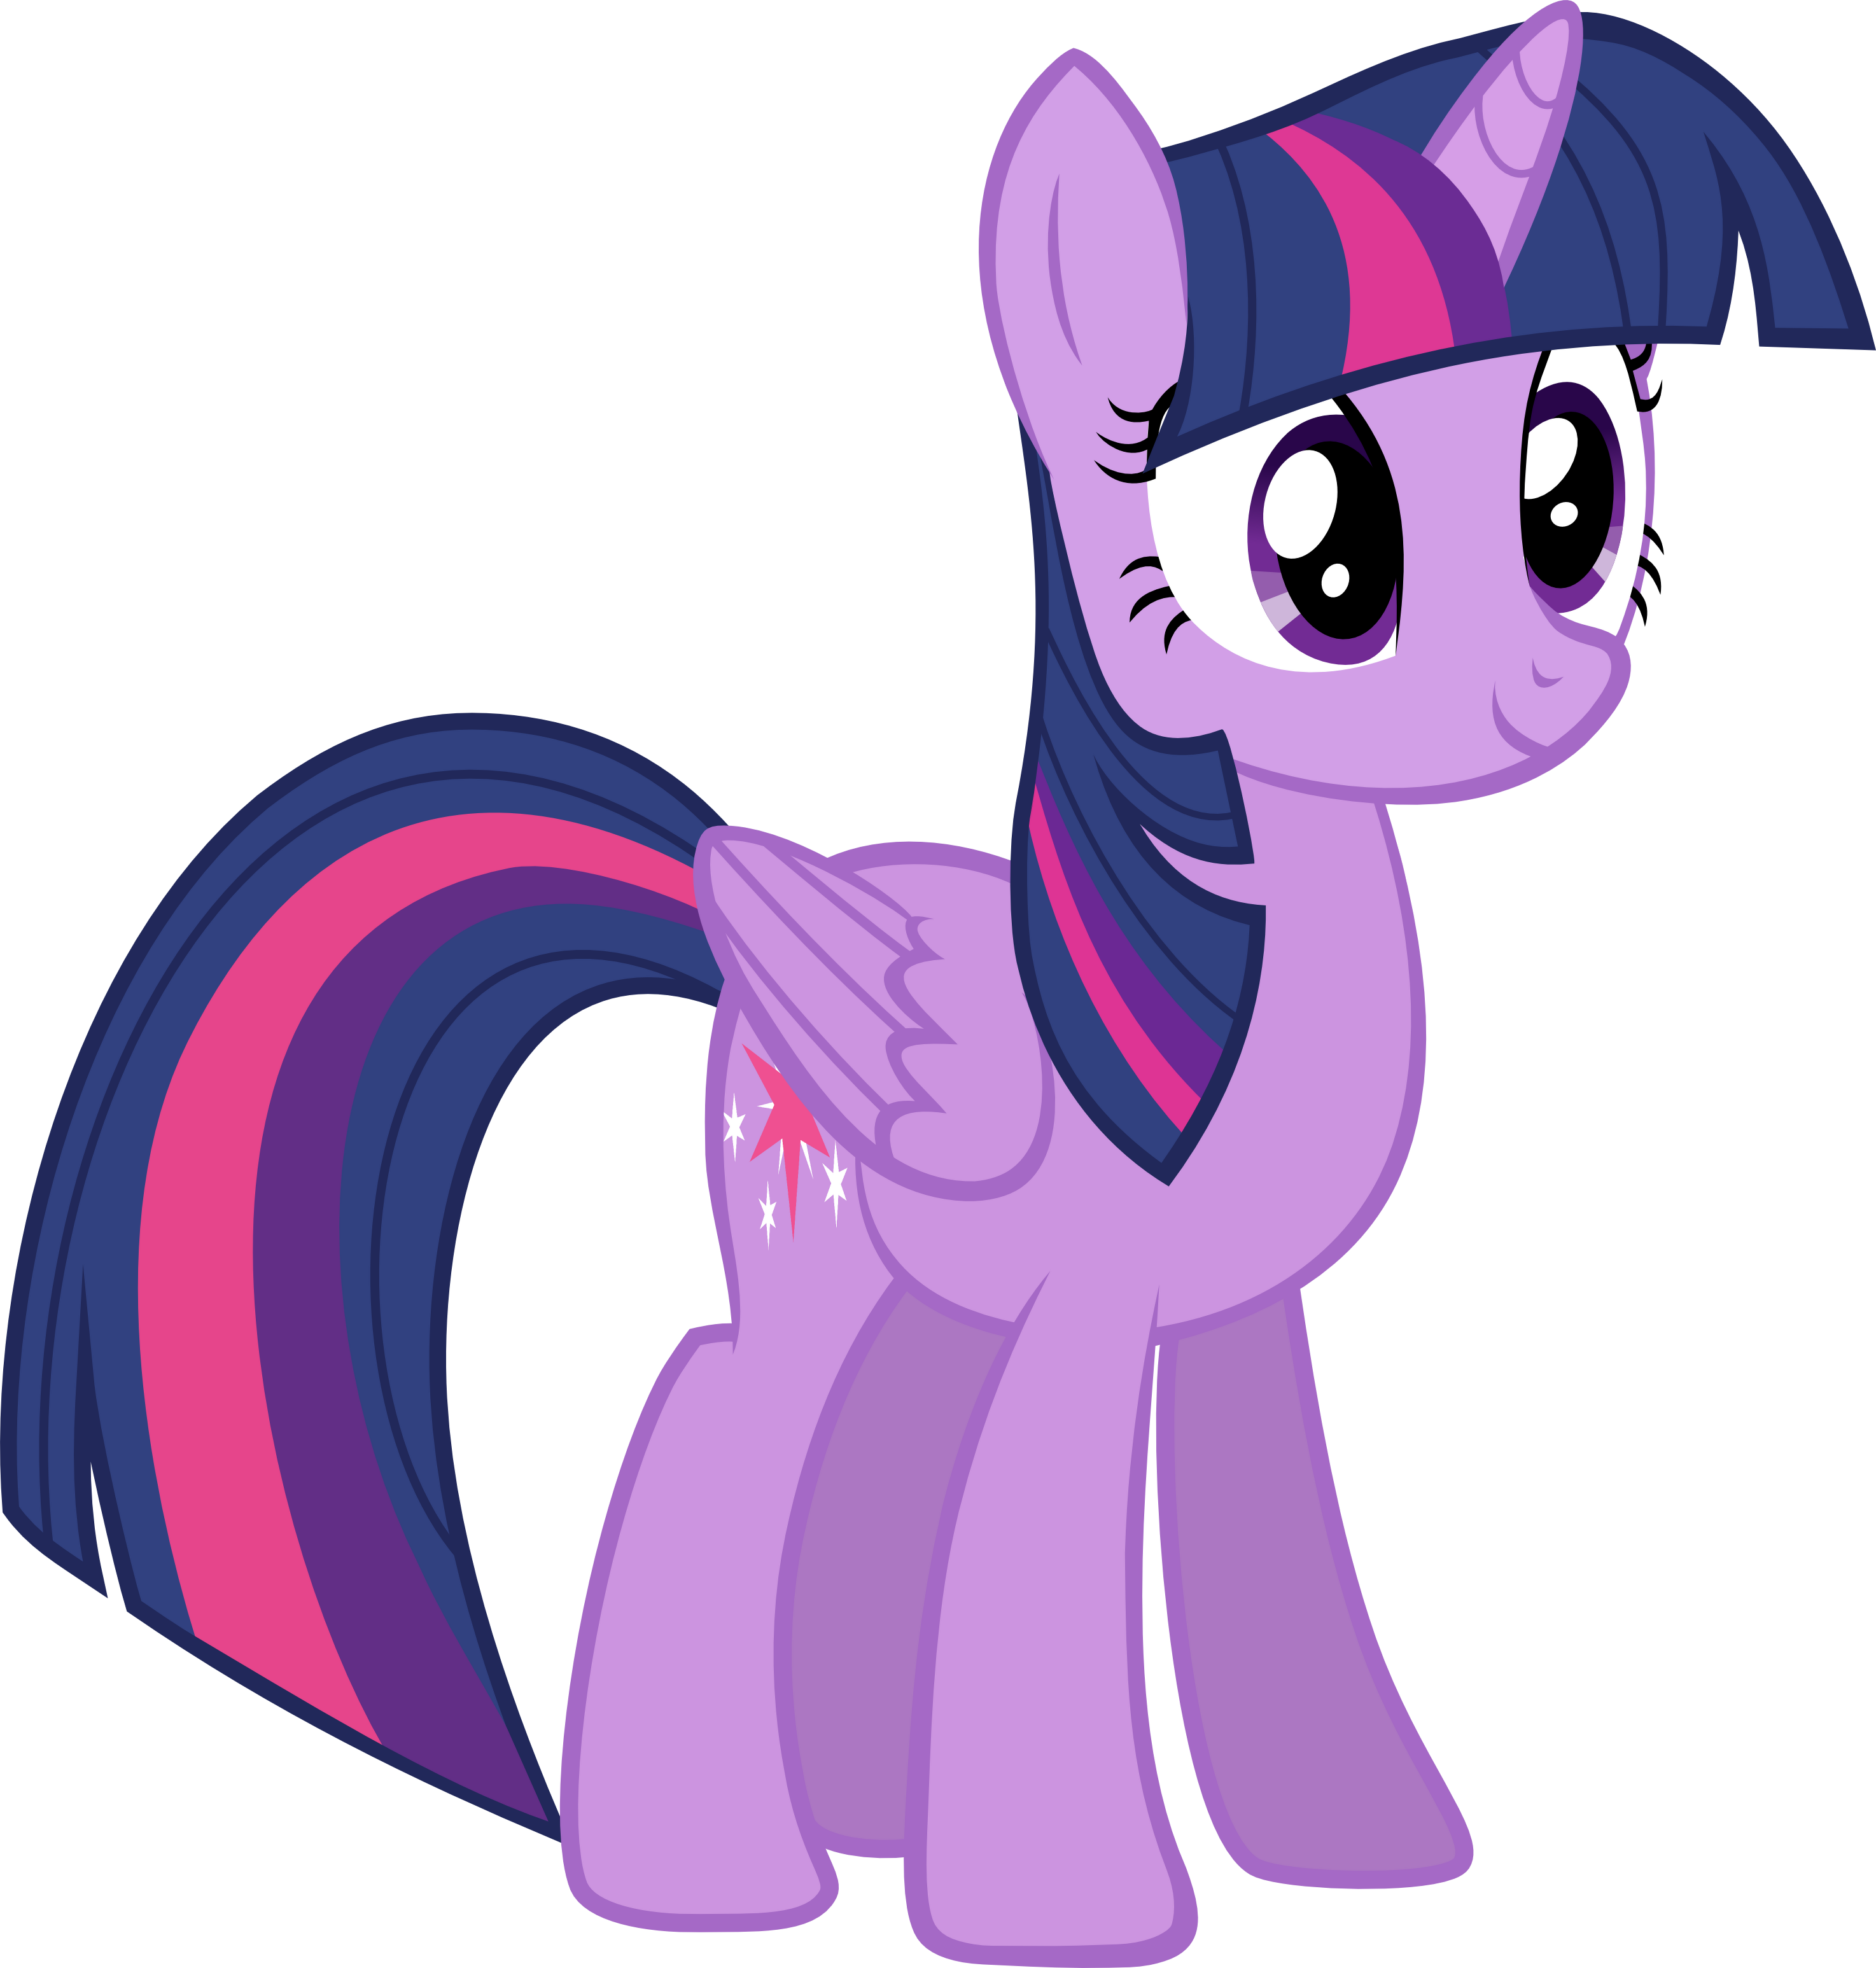 https://static.wikia.nocookie.net/the-ultimate-crossover/images/c/c7/Twilight_Sparkle_Alicorn_vector.png/revision/latest/scale-to-width-down/2948?cb=20180115015821